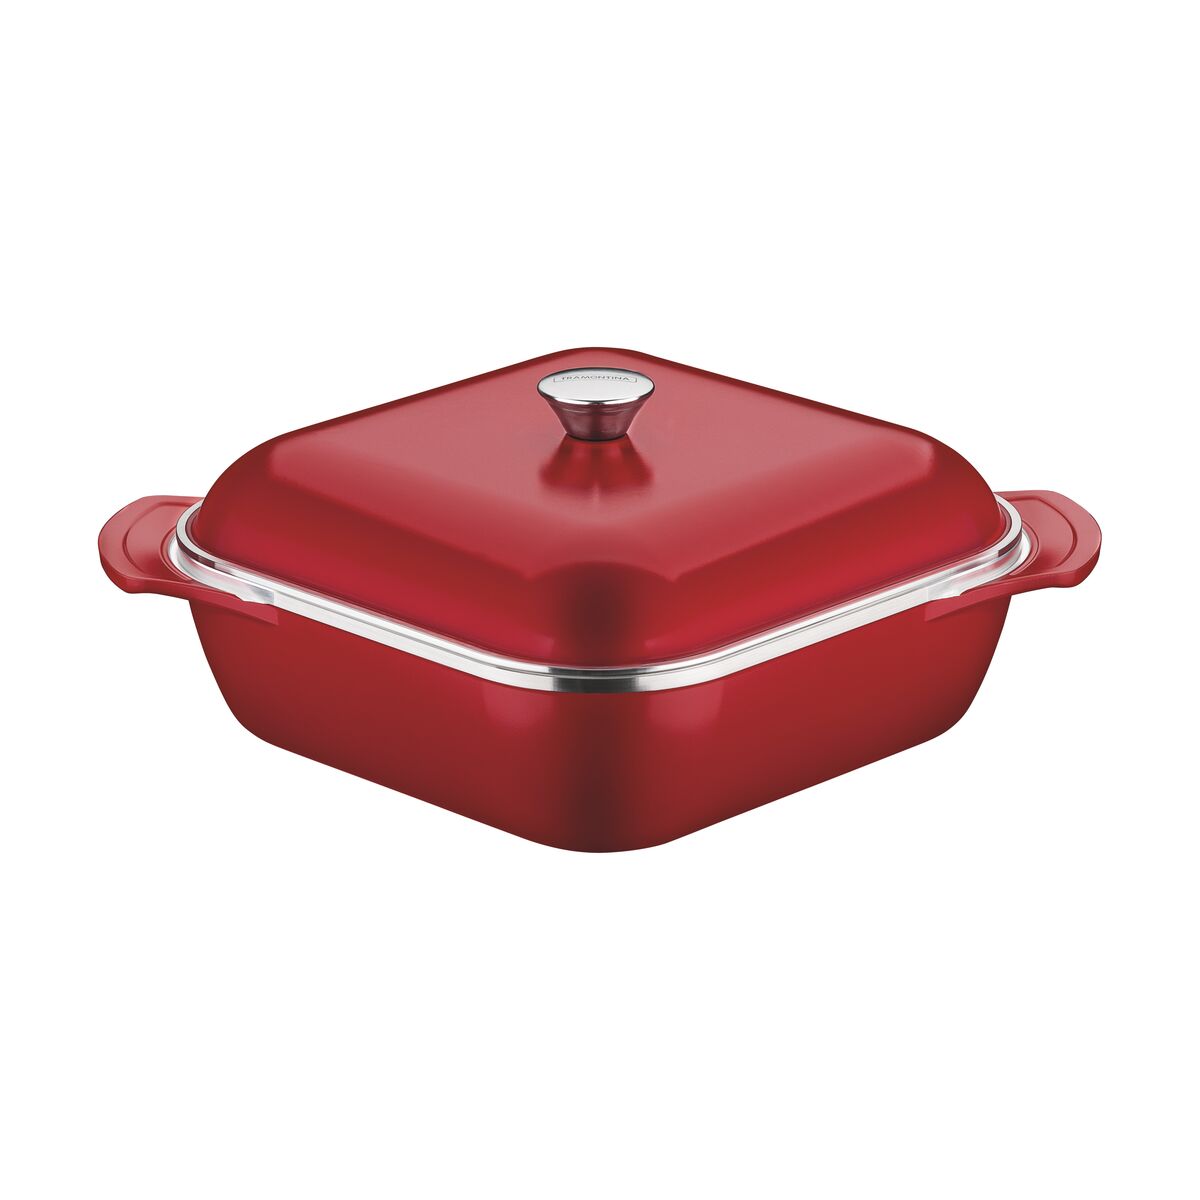 Tramontina Lyon forged aluminum, red, square casserole with interior Starflon High Performance nonstick coating and lid, 28 cm, 5.5 L